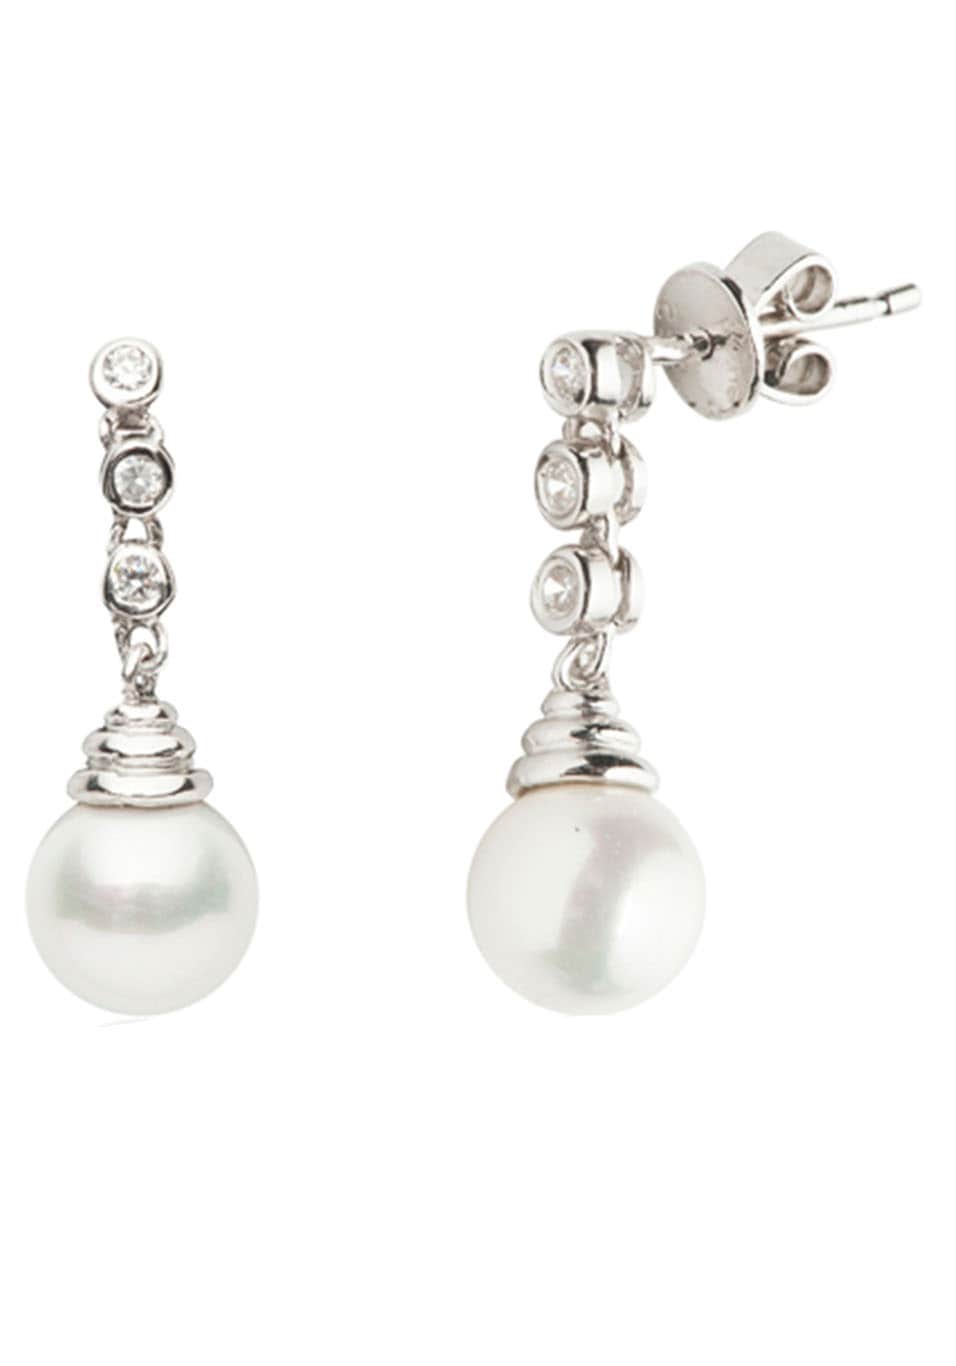 UNIKE JEWELLERY Paar Perle online (synth.) UK.BR.1204.0001«, mit Zirkonia PEARL, Ohrstecker - mit »CLASSY (synth.)